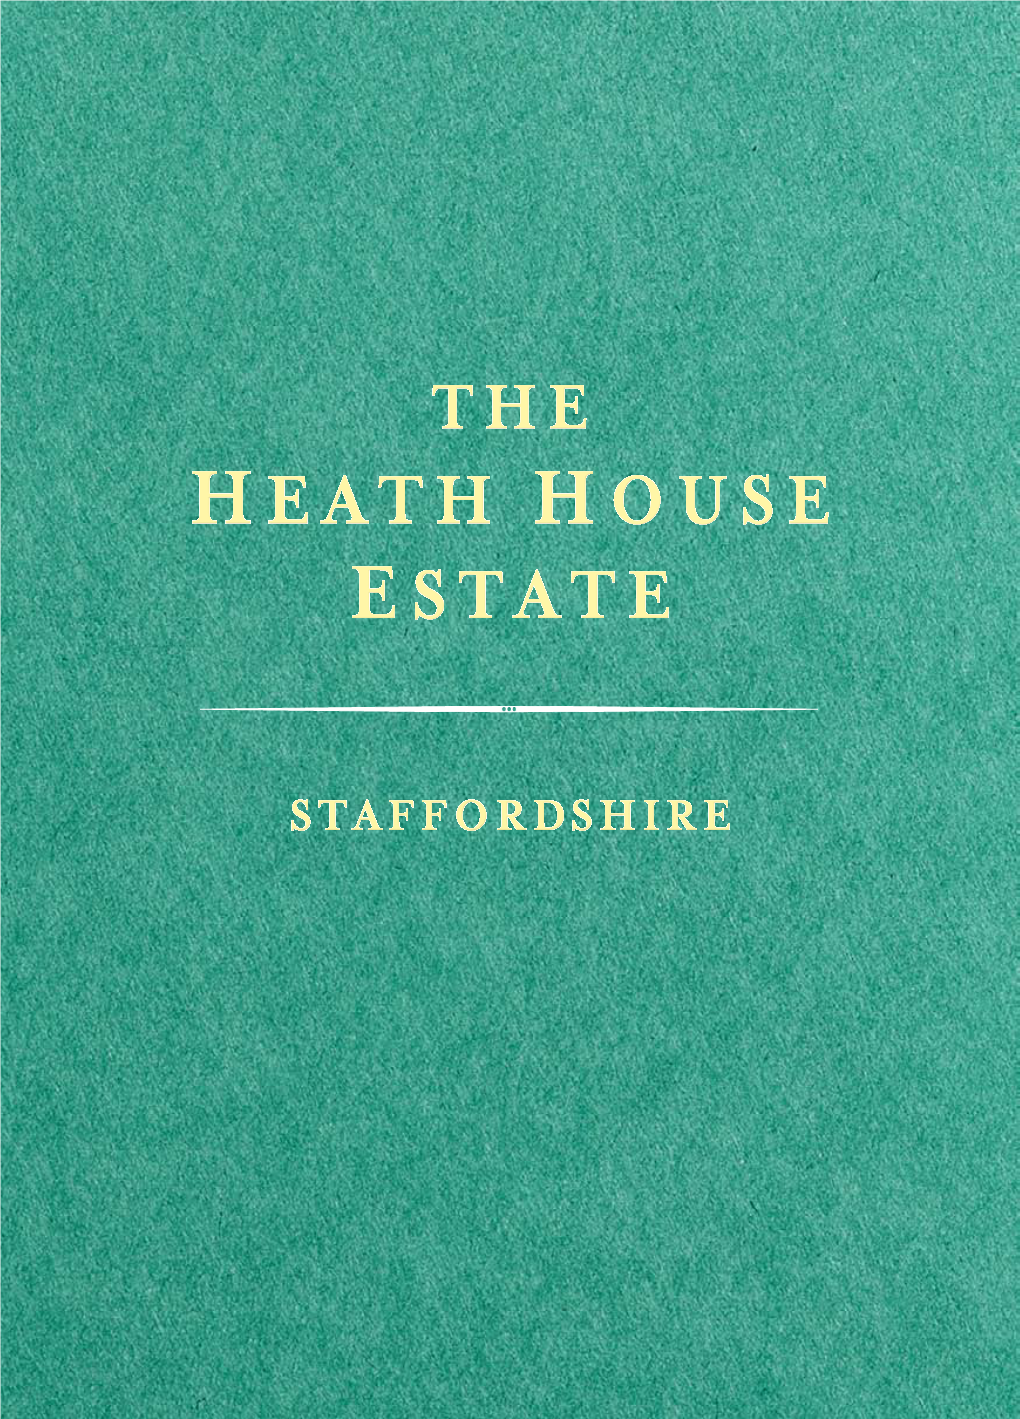 Heath House Estate Is a Superb Country Estate in Staffordshire, Located Almost Equidistant Between Manchester, Nottingham and Birmingham